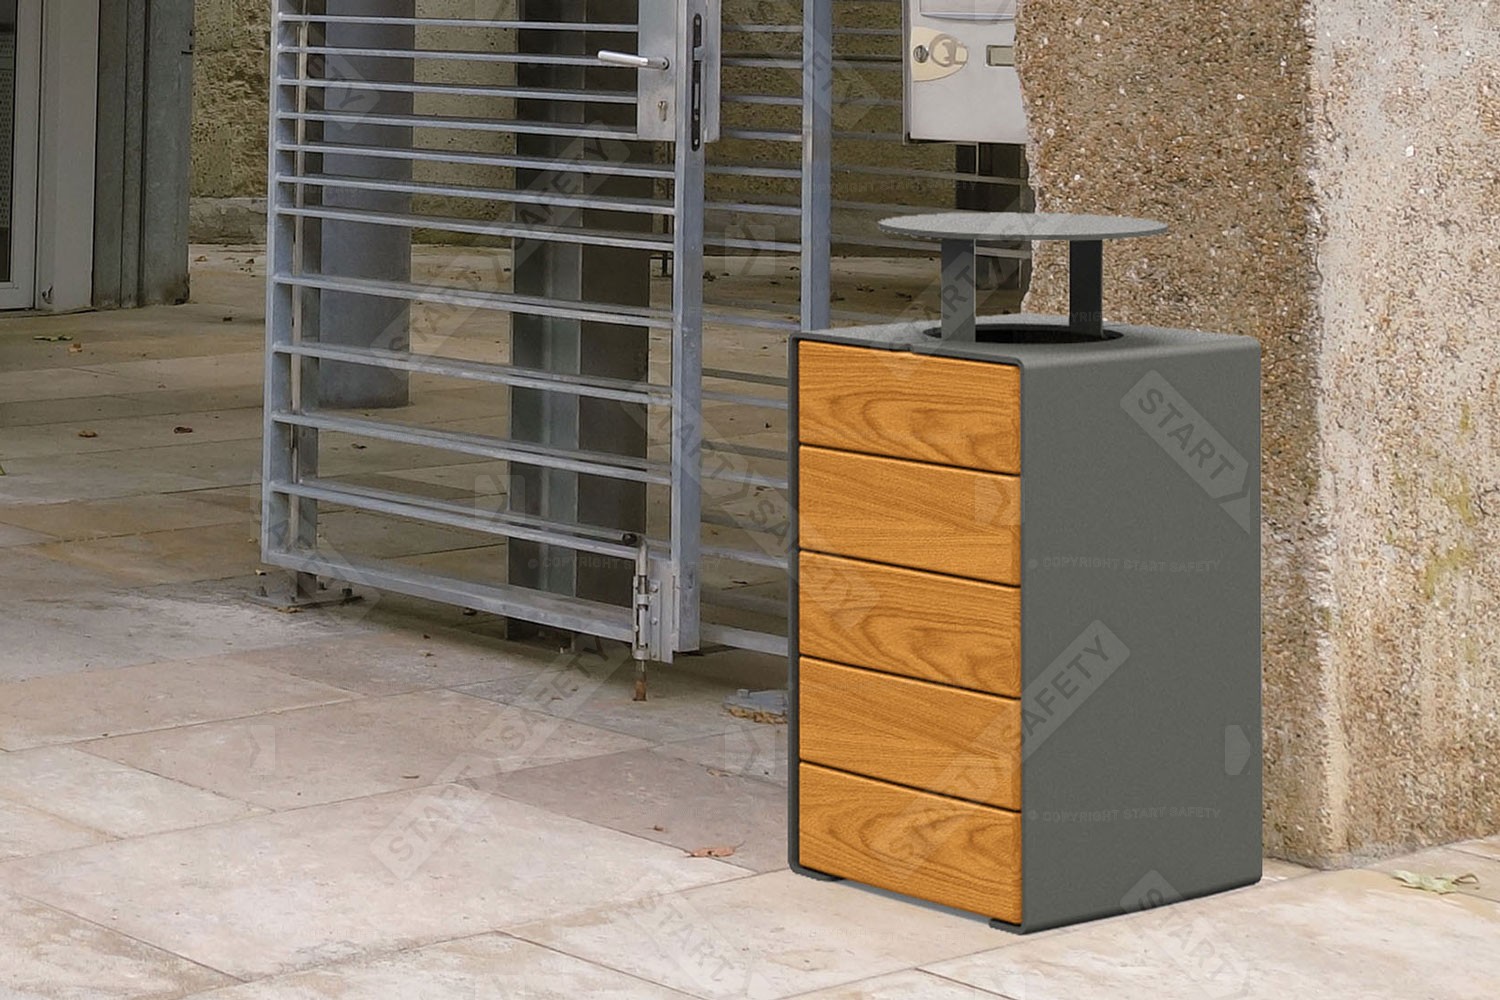 Procity Kube Bin With Lid In Wood installed next To Town Wall